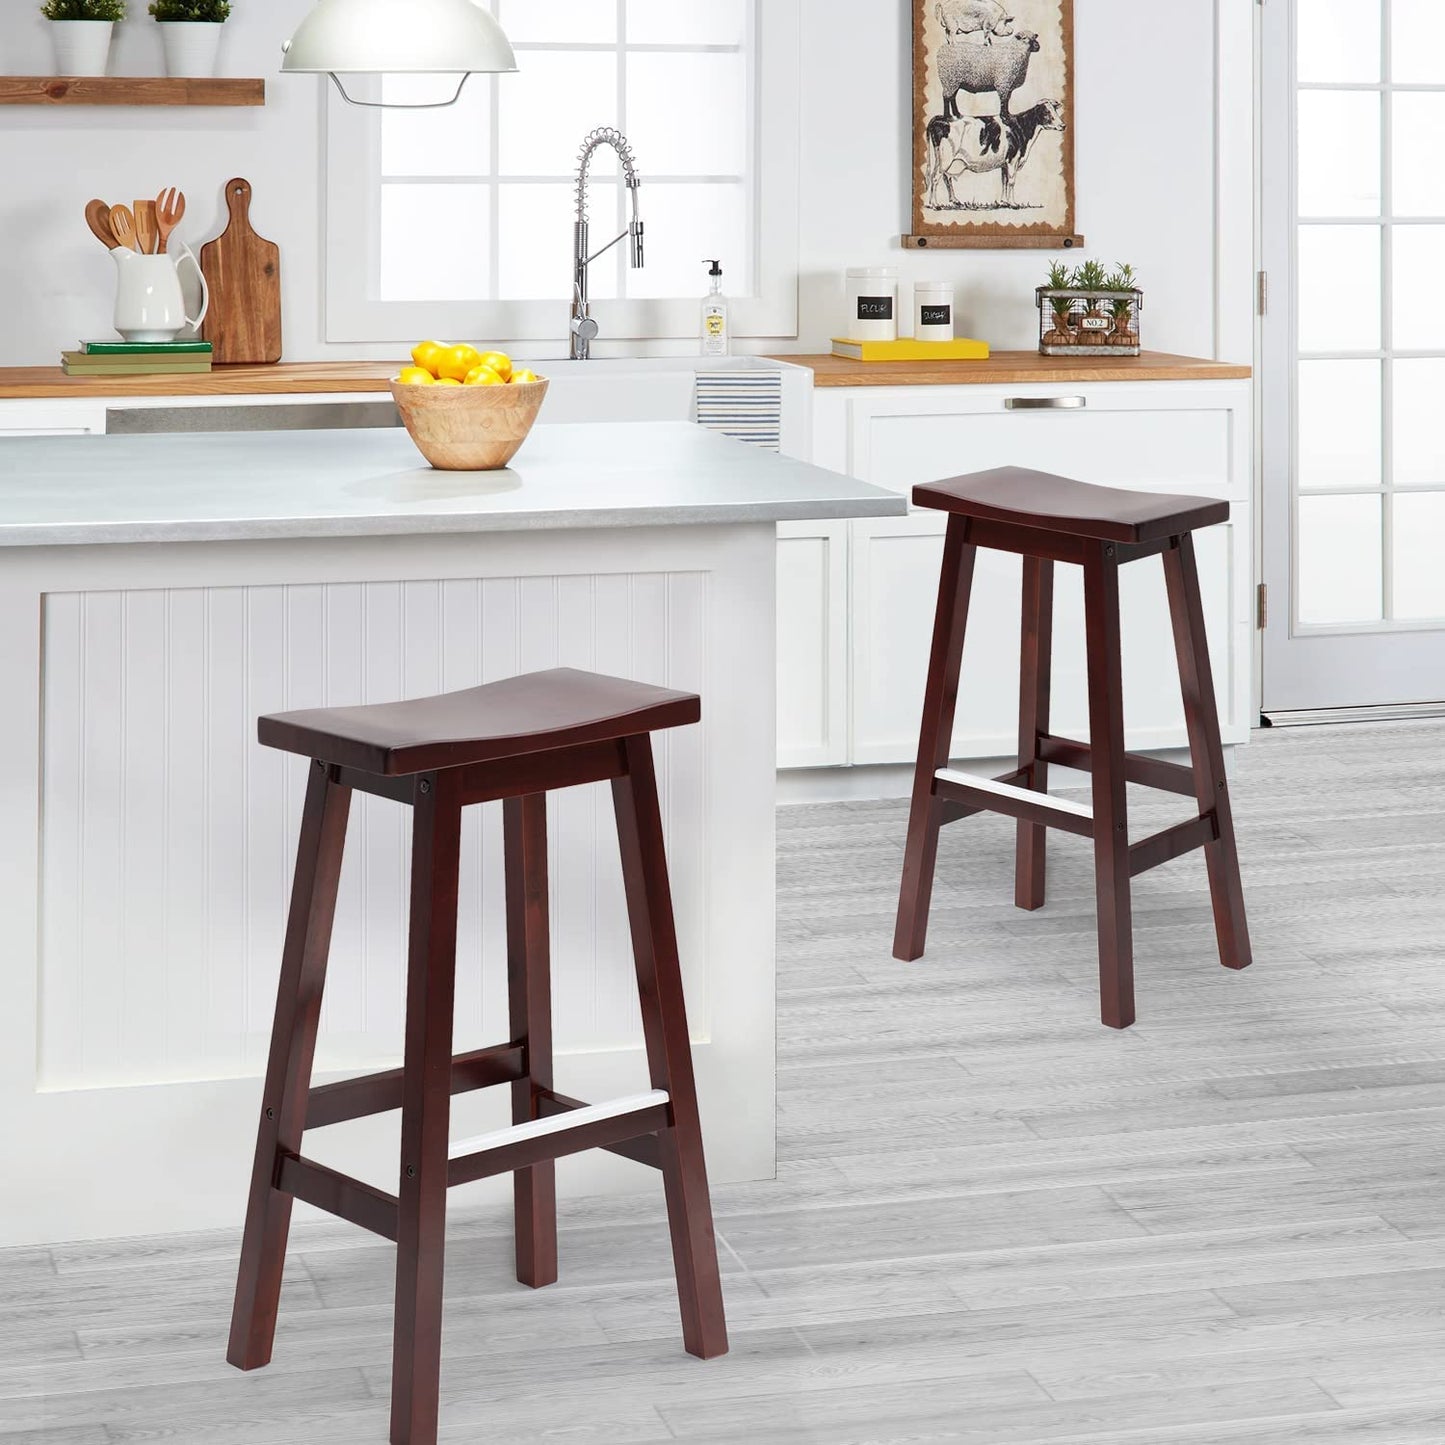 Capacmkseh Solid Wood Saddle-Seat Kitchen Counter Barstools Set of 2, 30-Inch Height, Counter Height Bar Stools Wooden Stool Saddle Chair Tall Stool